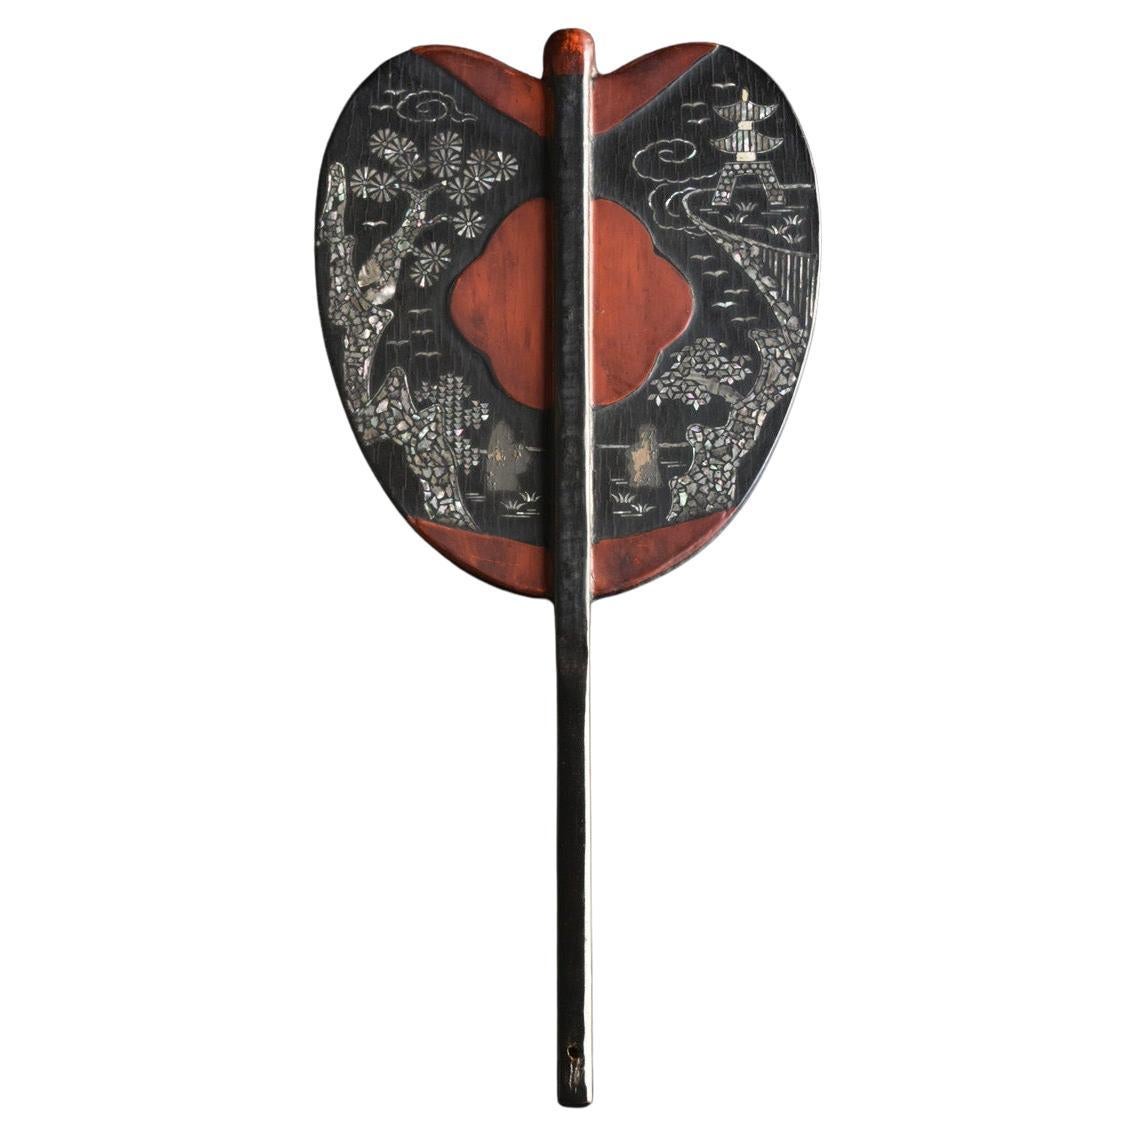 "Gunbai" painted with old Japanese lacquer /Wooden objects on the wall /Uchiwa